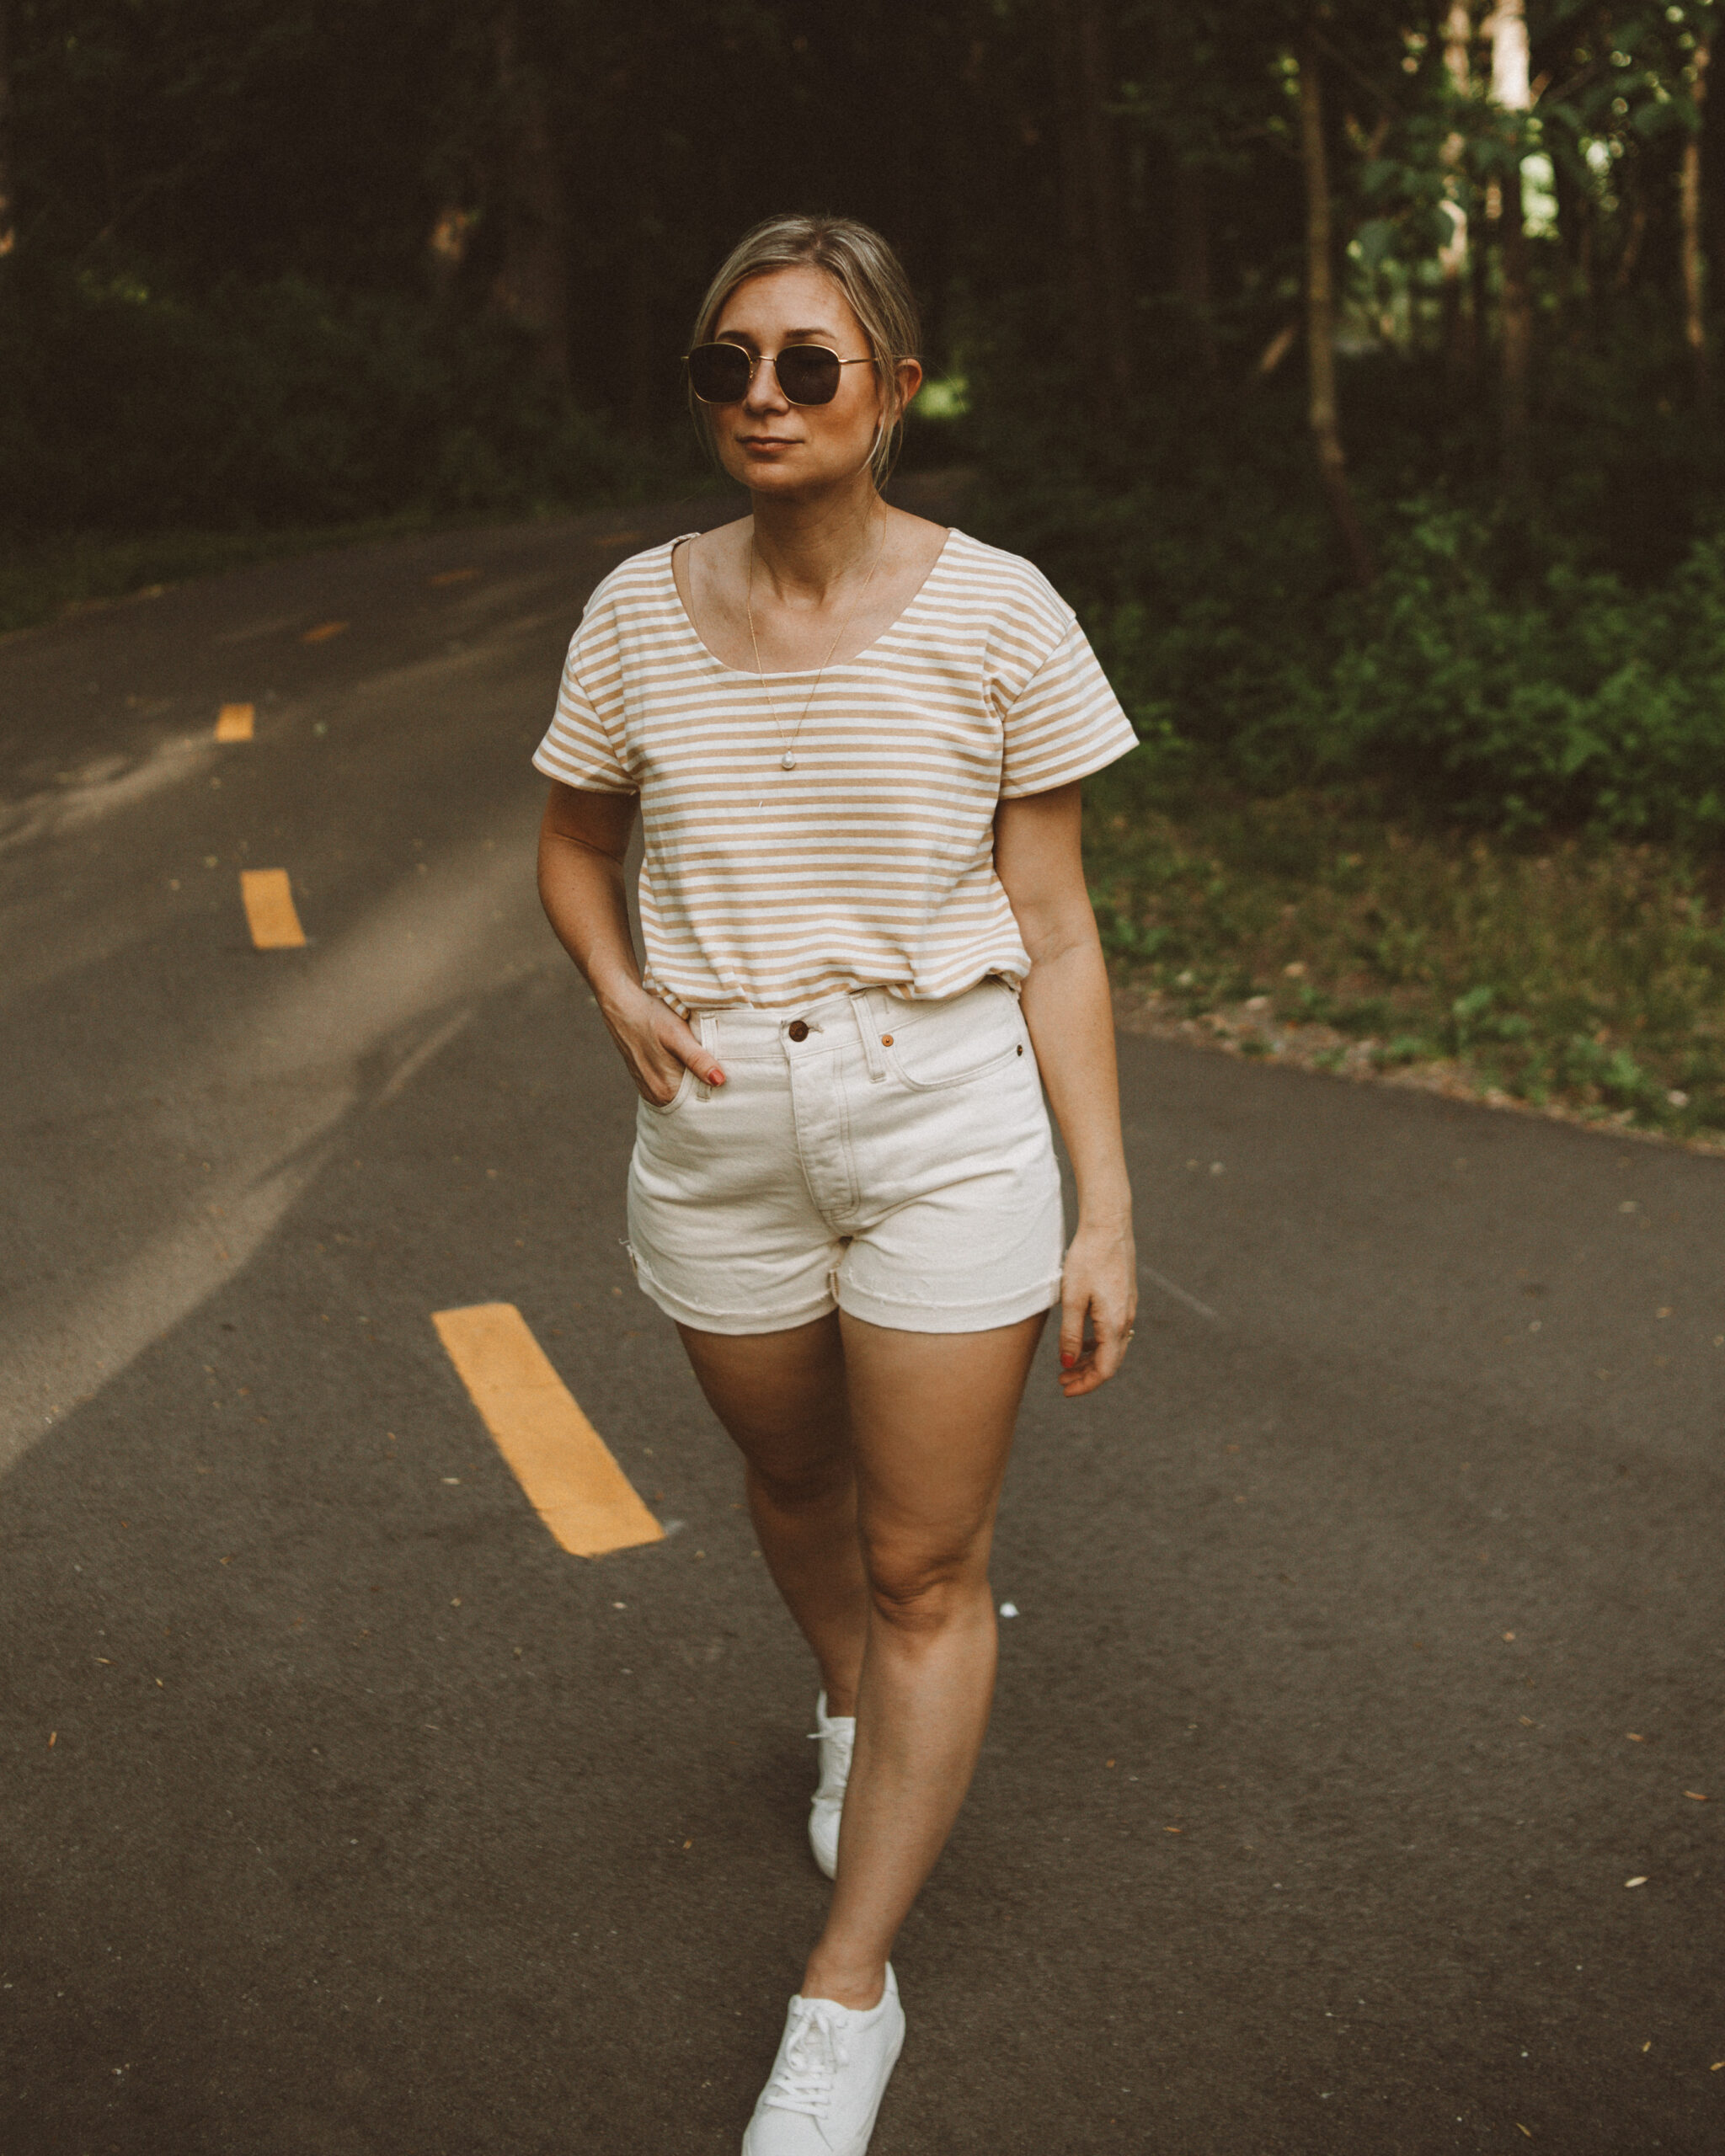 Karin Emily wears a striped tee, white sneakers, and cream jean shorts